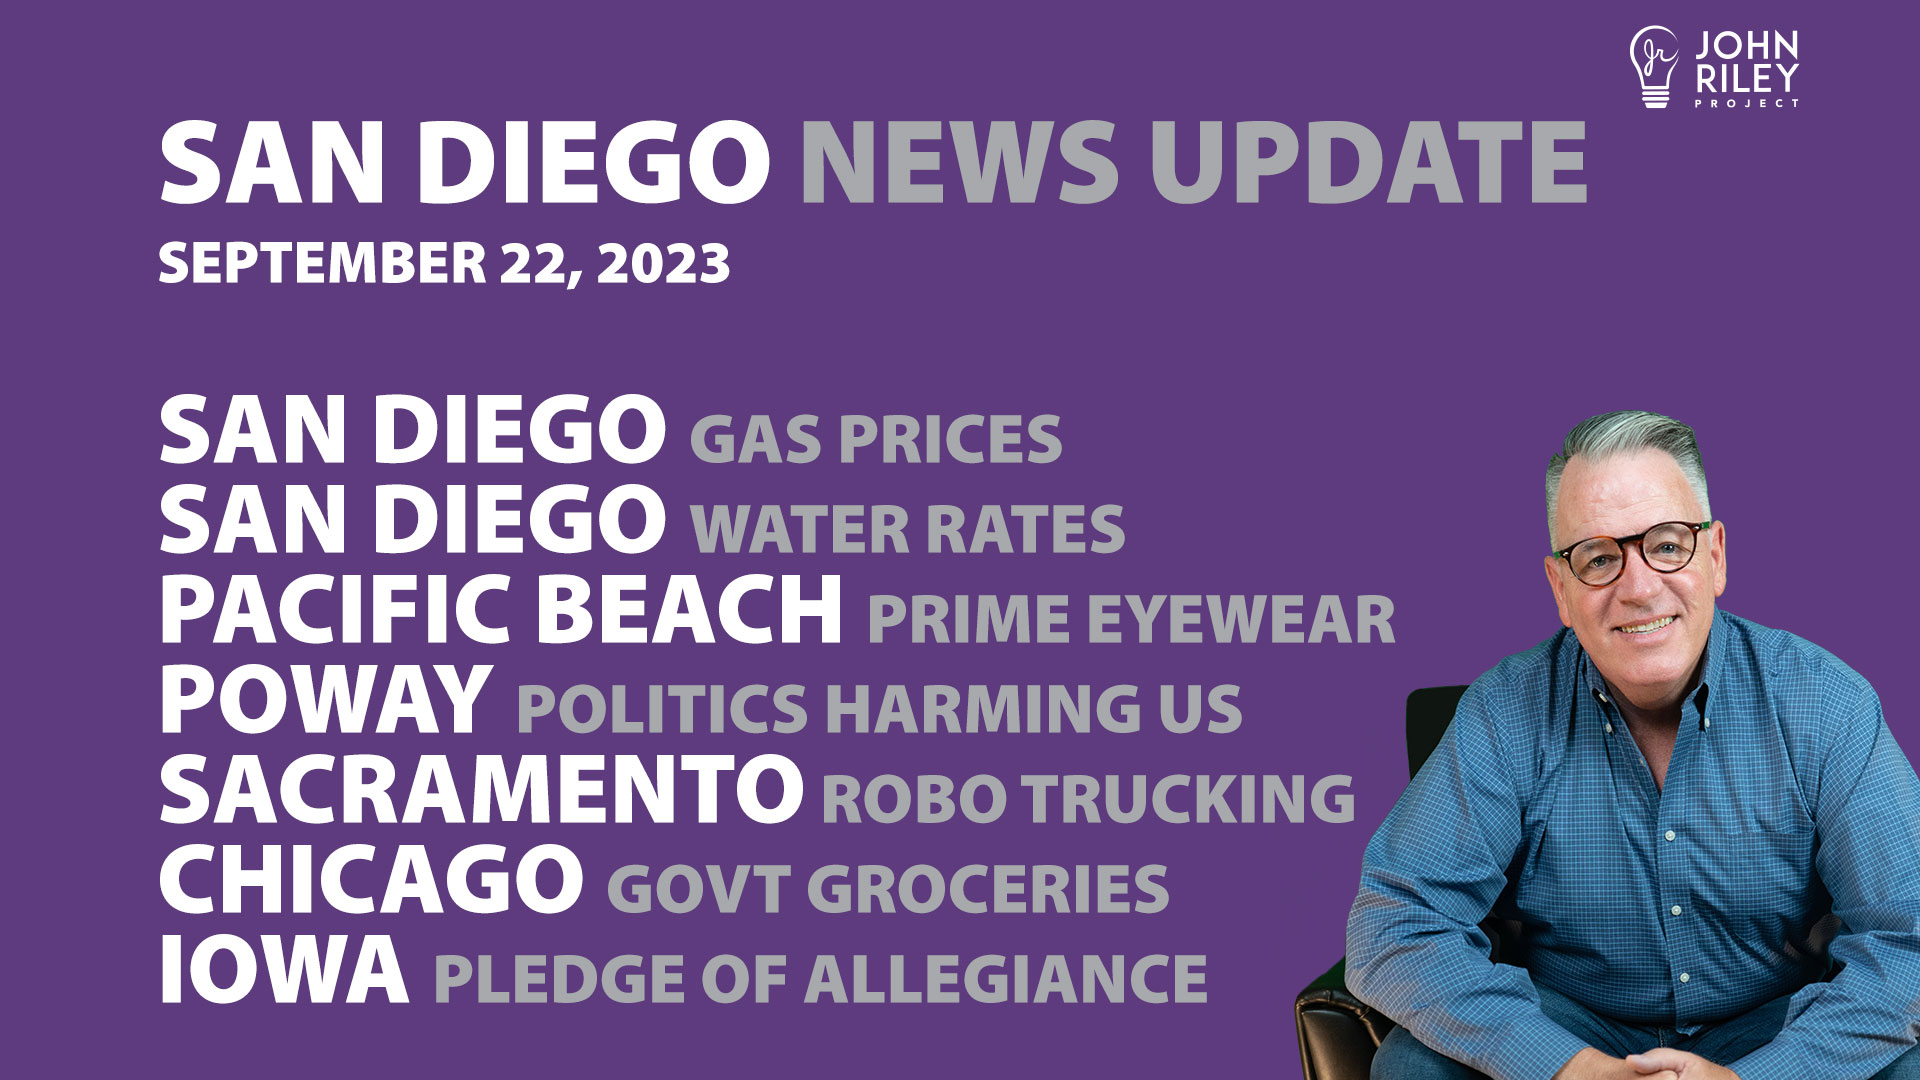 John Riley discusses San Diego News Update Sept 22: Gas Prices, Water Rates, Coach Prime/Blenders, Self Driving Trucks